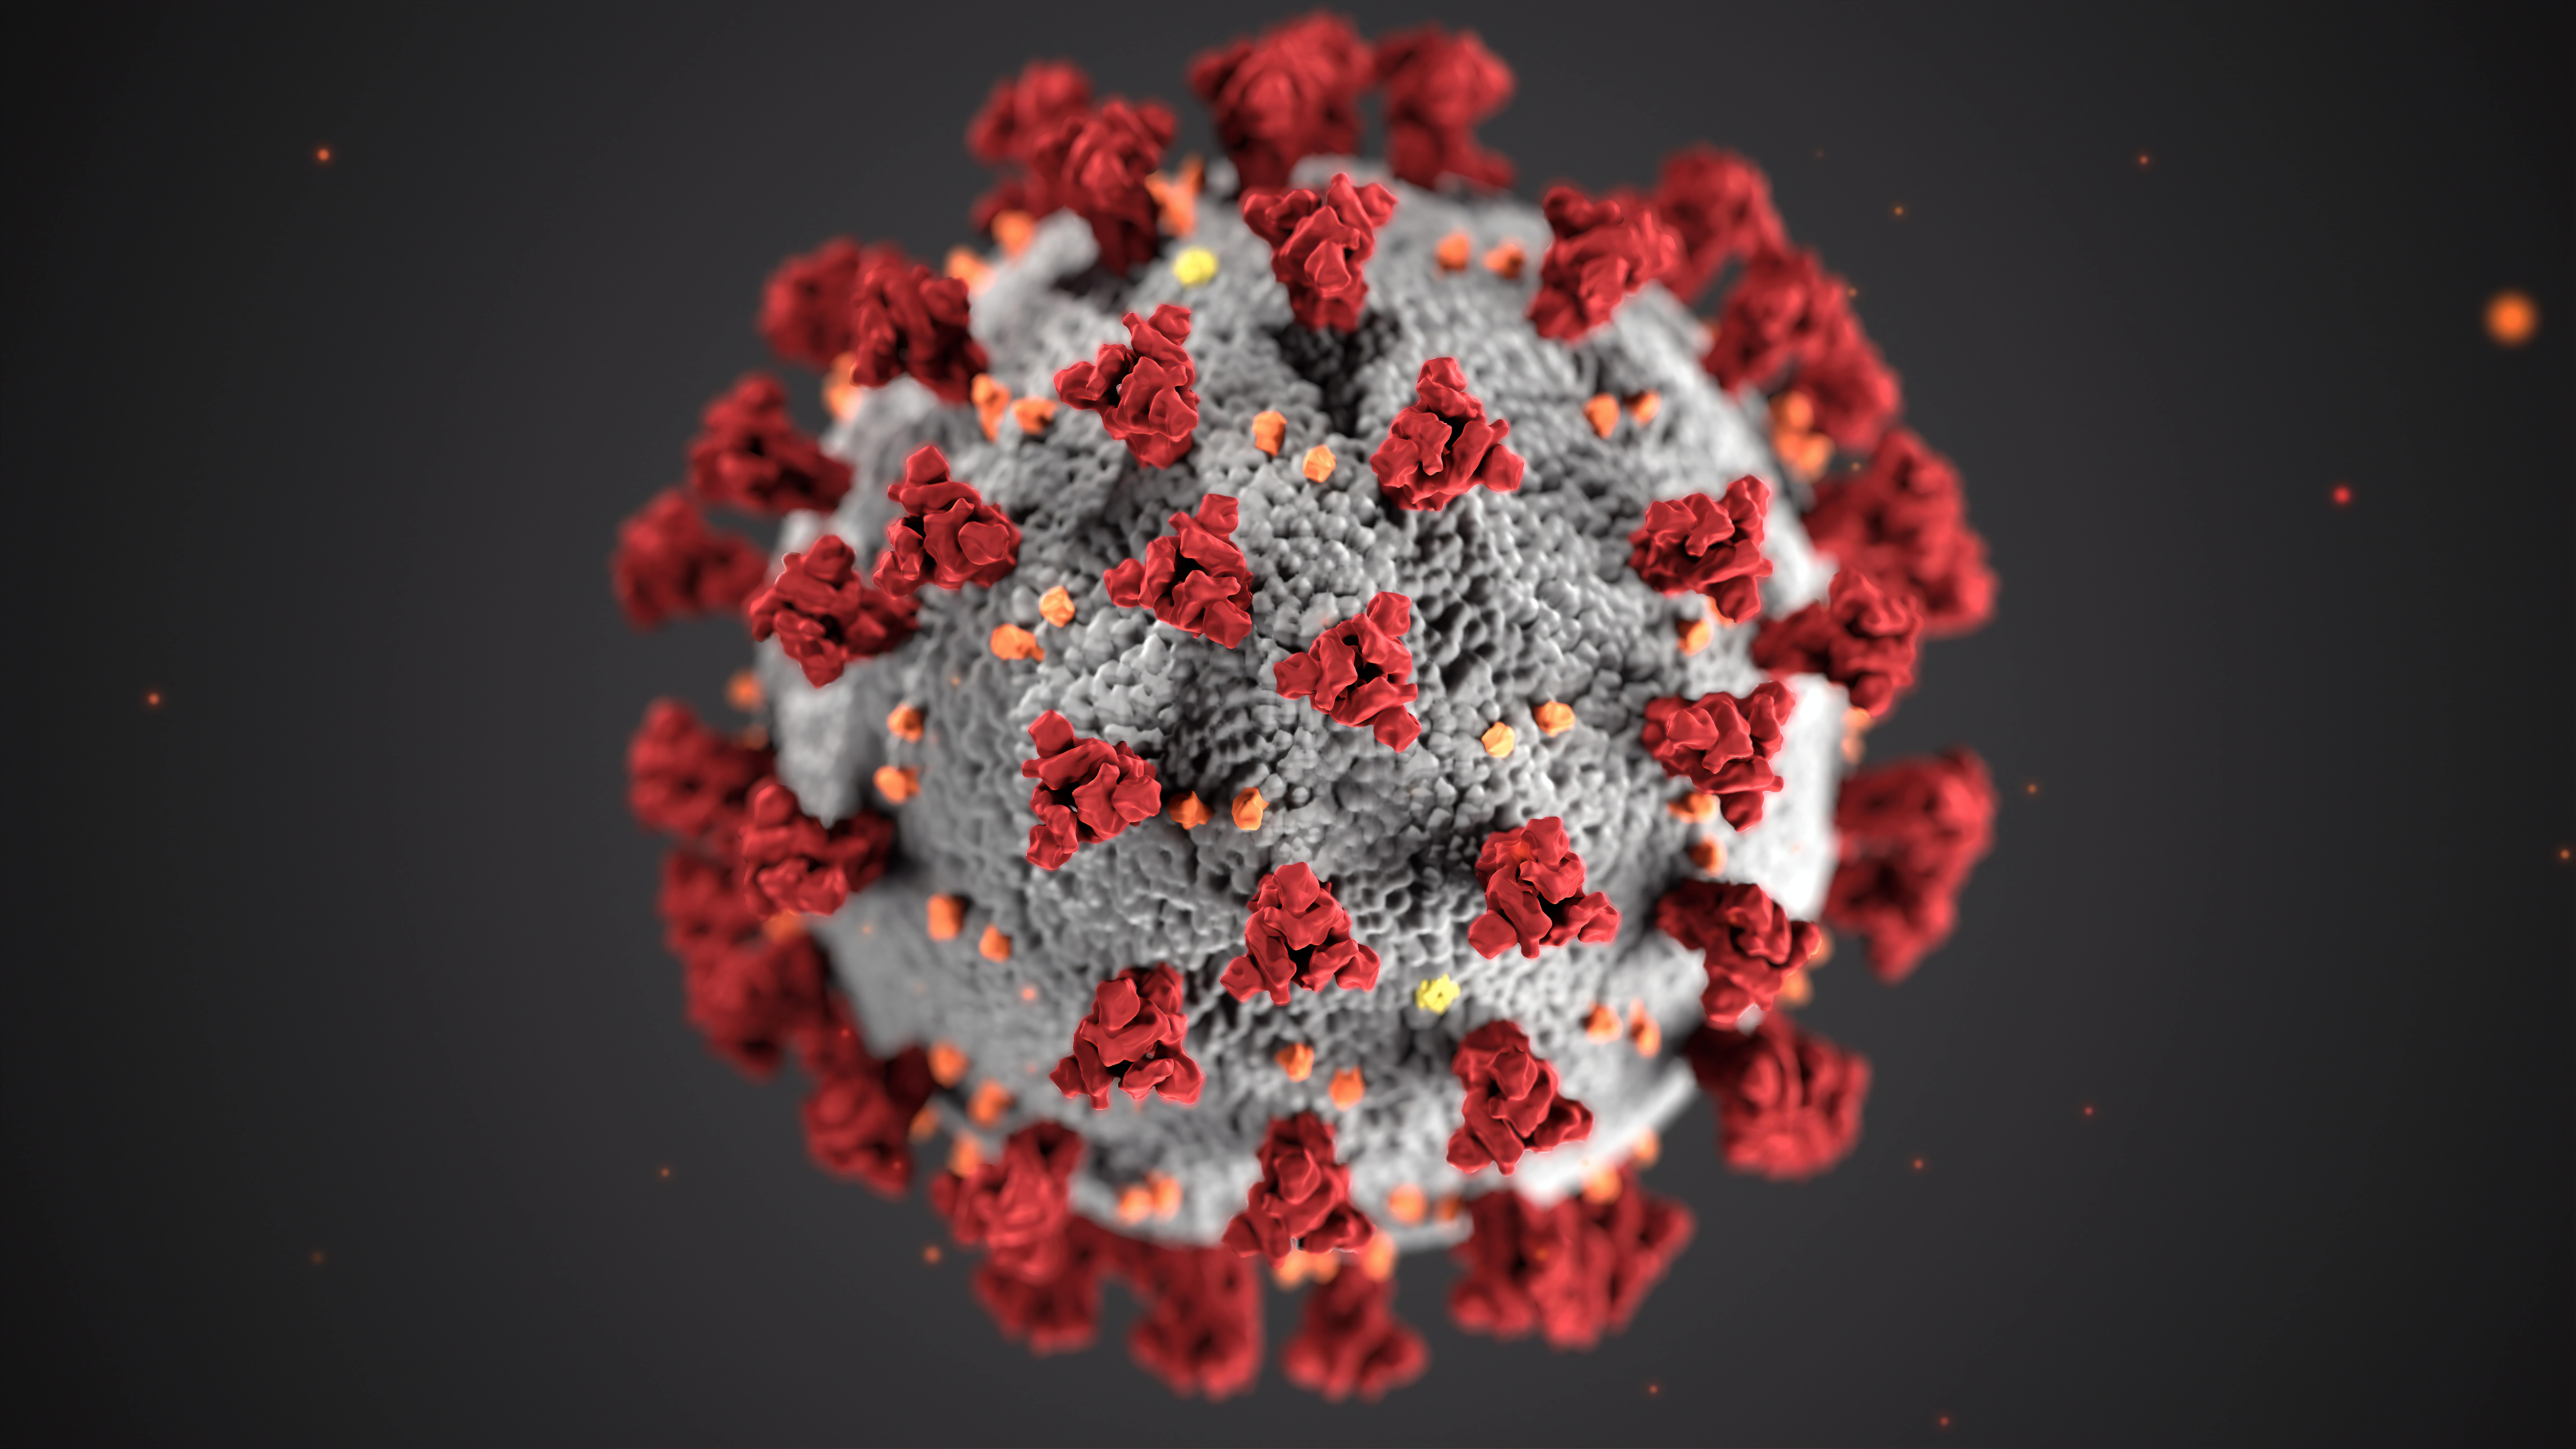 Unprecedented News Coronavirus (COVID-19) And Our Commitment To You